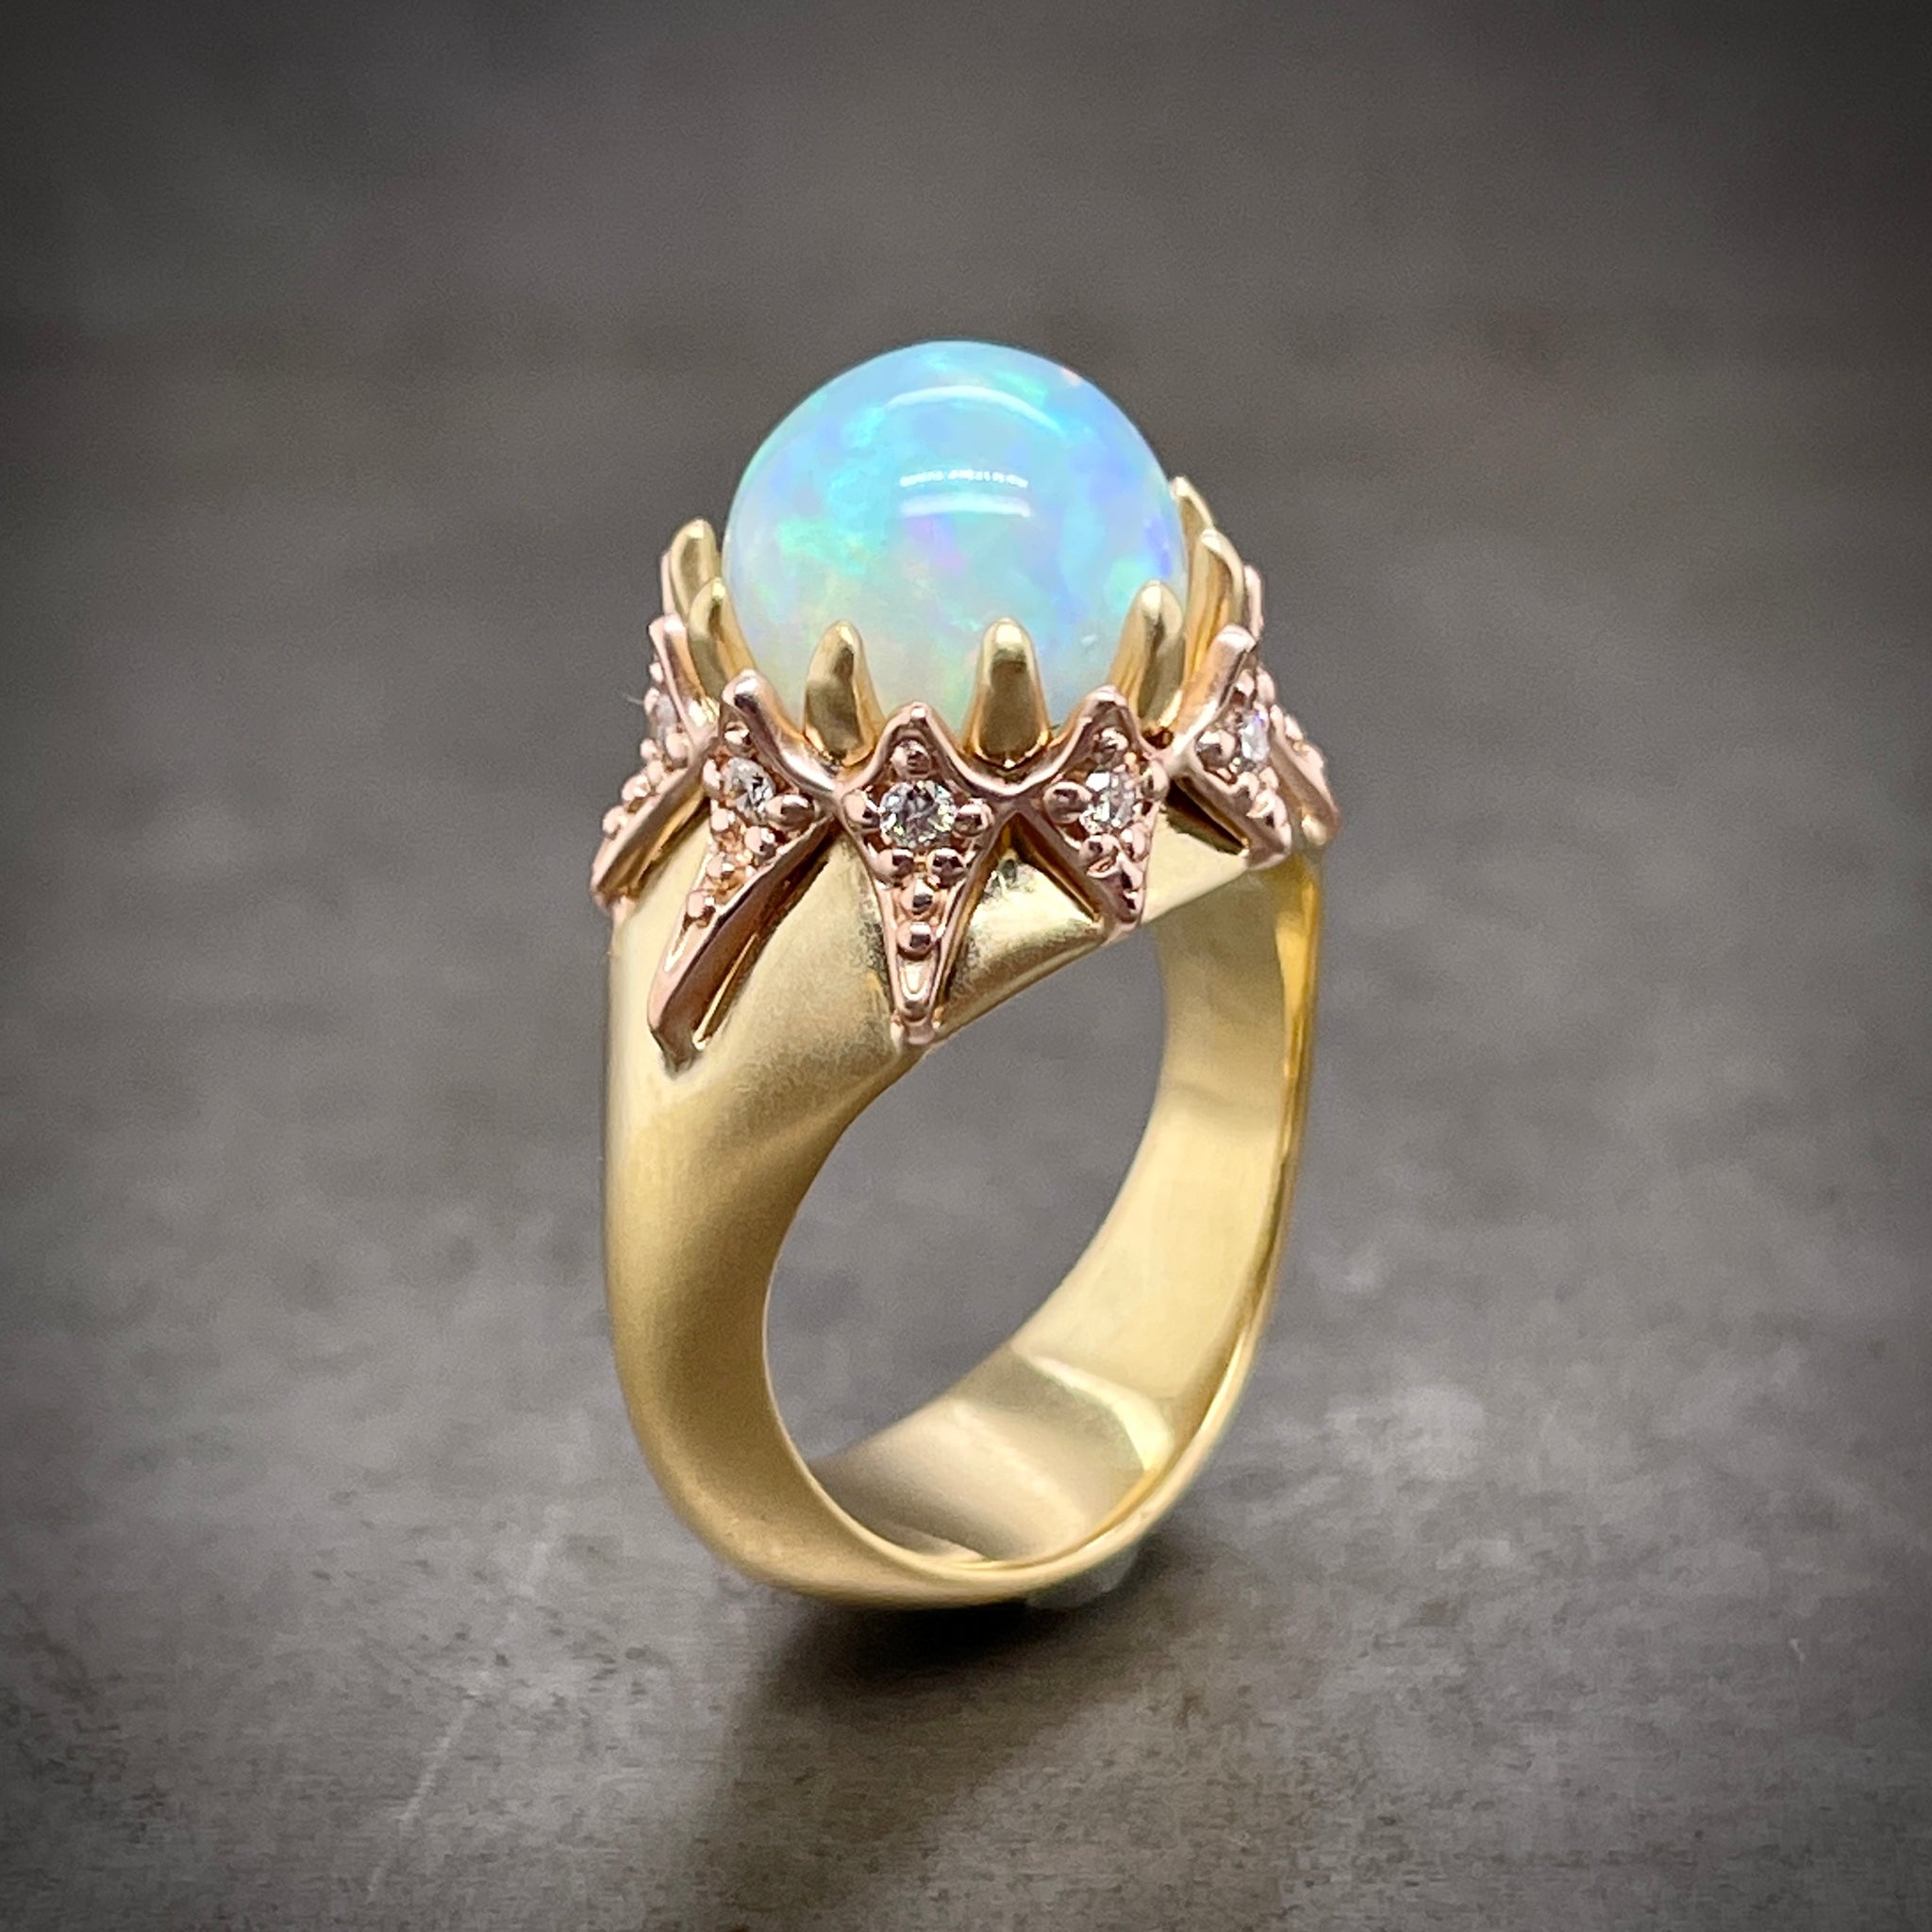 This ring features one 10mm opal claw prong set in 18 karat yellow gold. Encompassing the diameter of the prong setting is a 14 karat rose gold jacket. Within each diamond on the rose gold mounting is one round brilliant diamond. This ring features an 18 karat yellow gold shank with a matte finish.